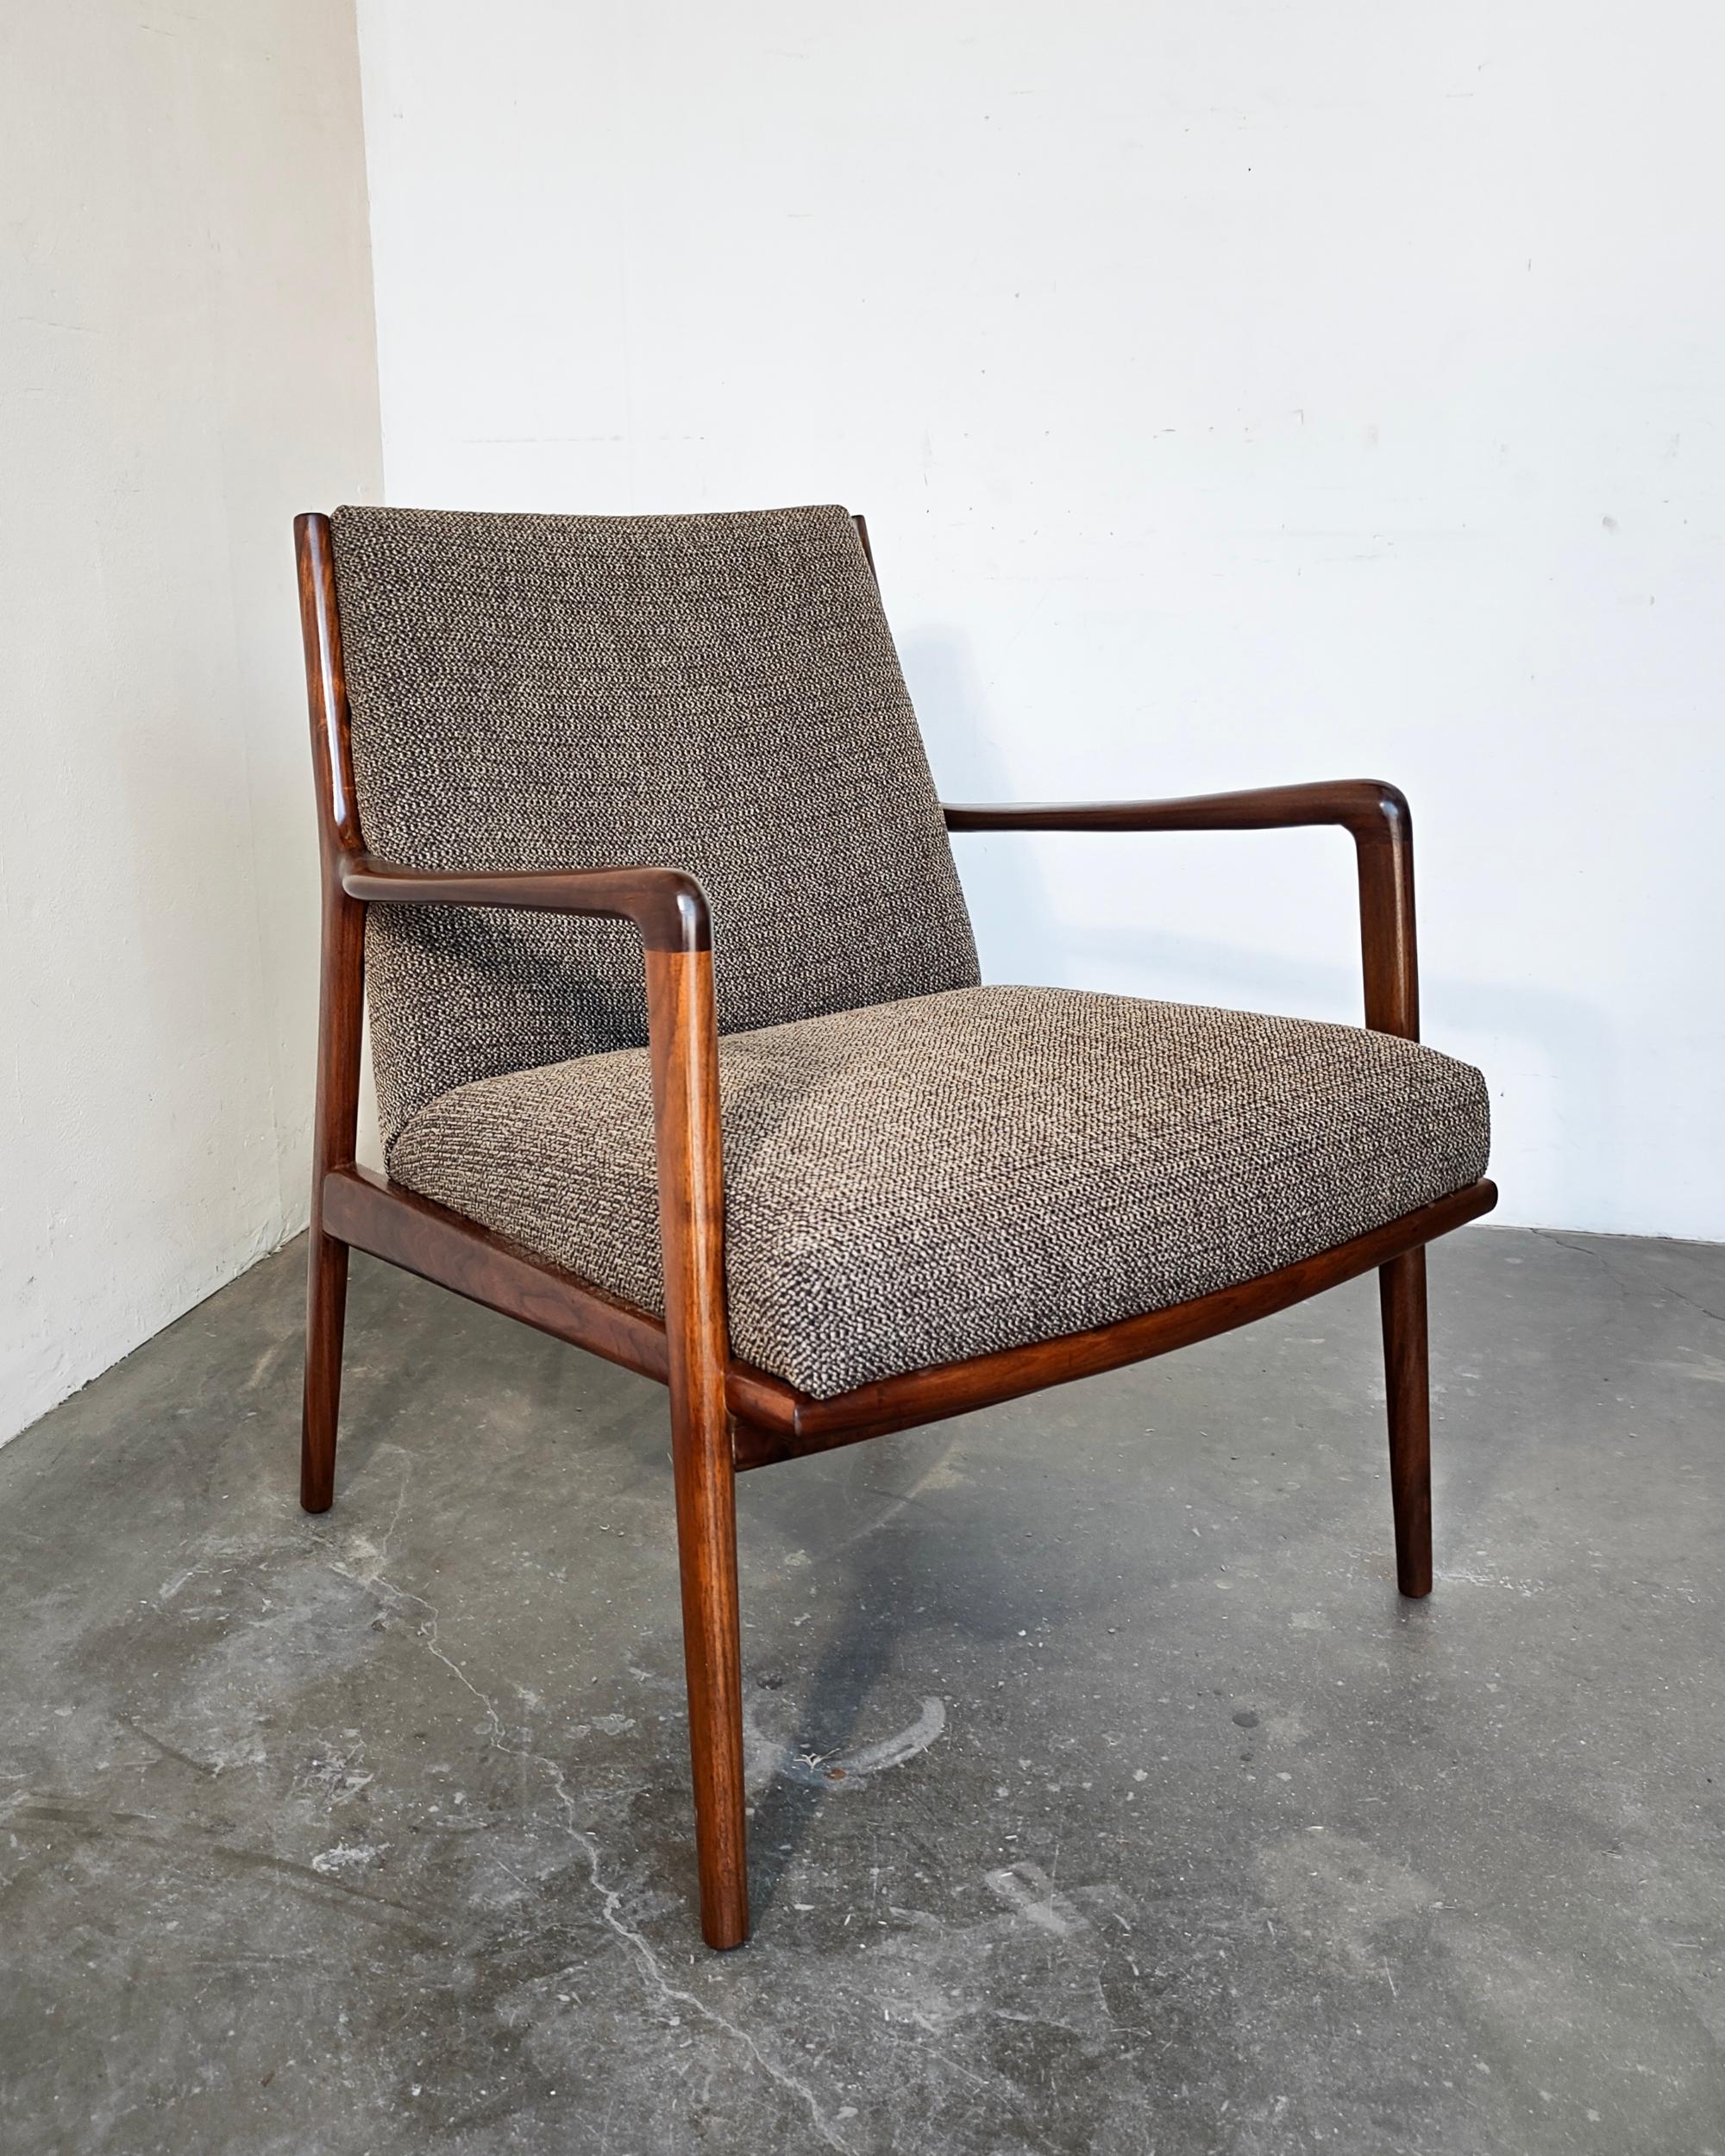 Refinished solid walnut mid-century modern Danish lounge chair. Restored vintage condition with semi-gloss oil-rubbed finish to showcase beautiful wood grain. New dark multi-color tweed upholstery. Overall excellent condition, some very light wear